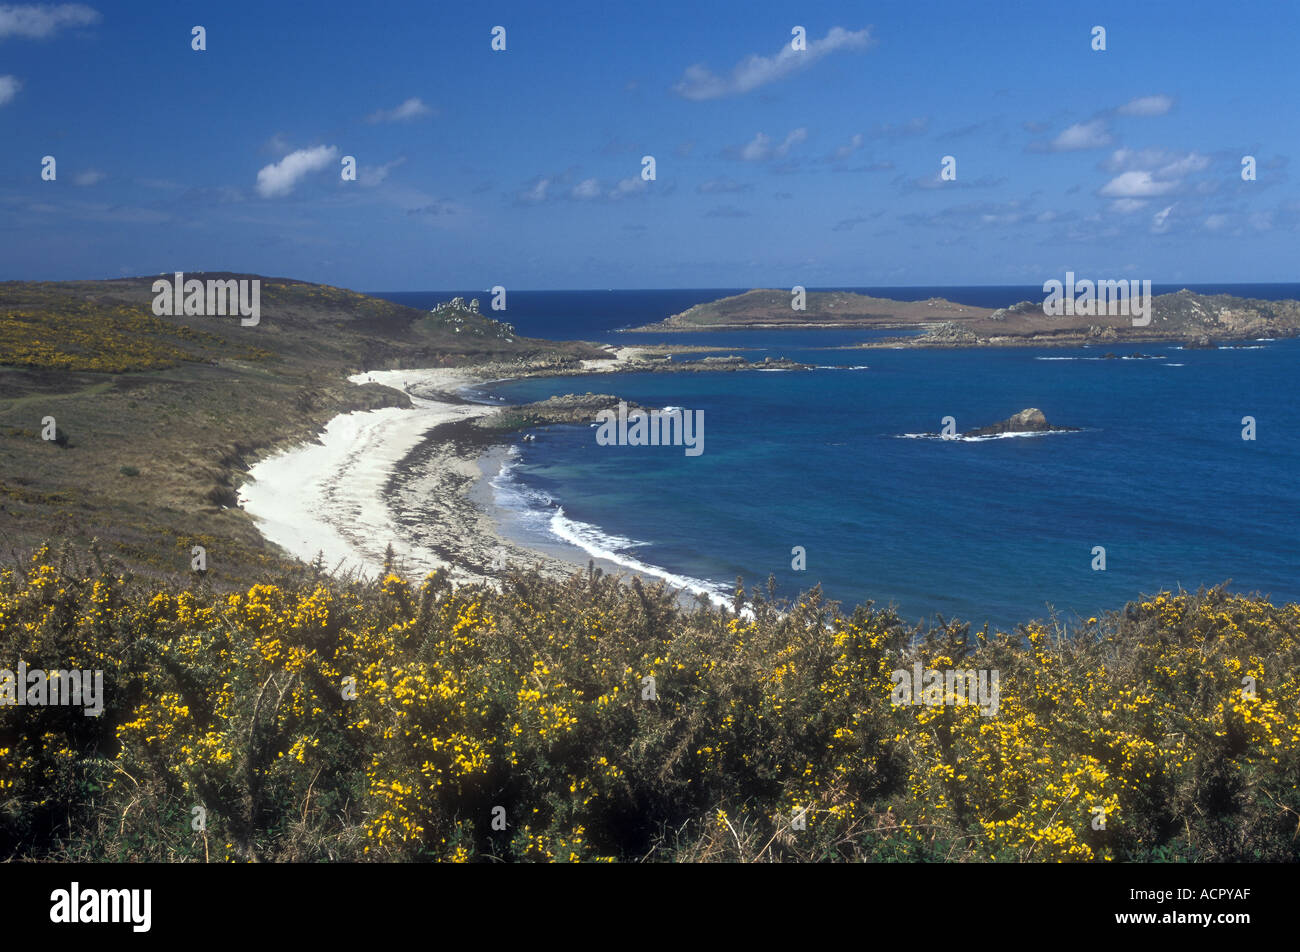 ST MARTIN'S BAY ST MARTIN'S Isole Scilly Foto Stock